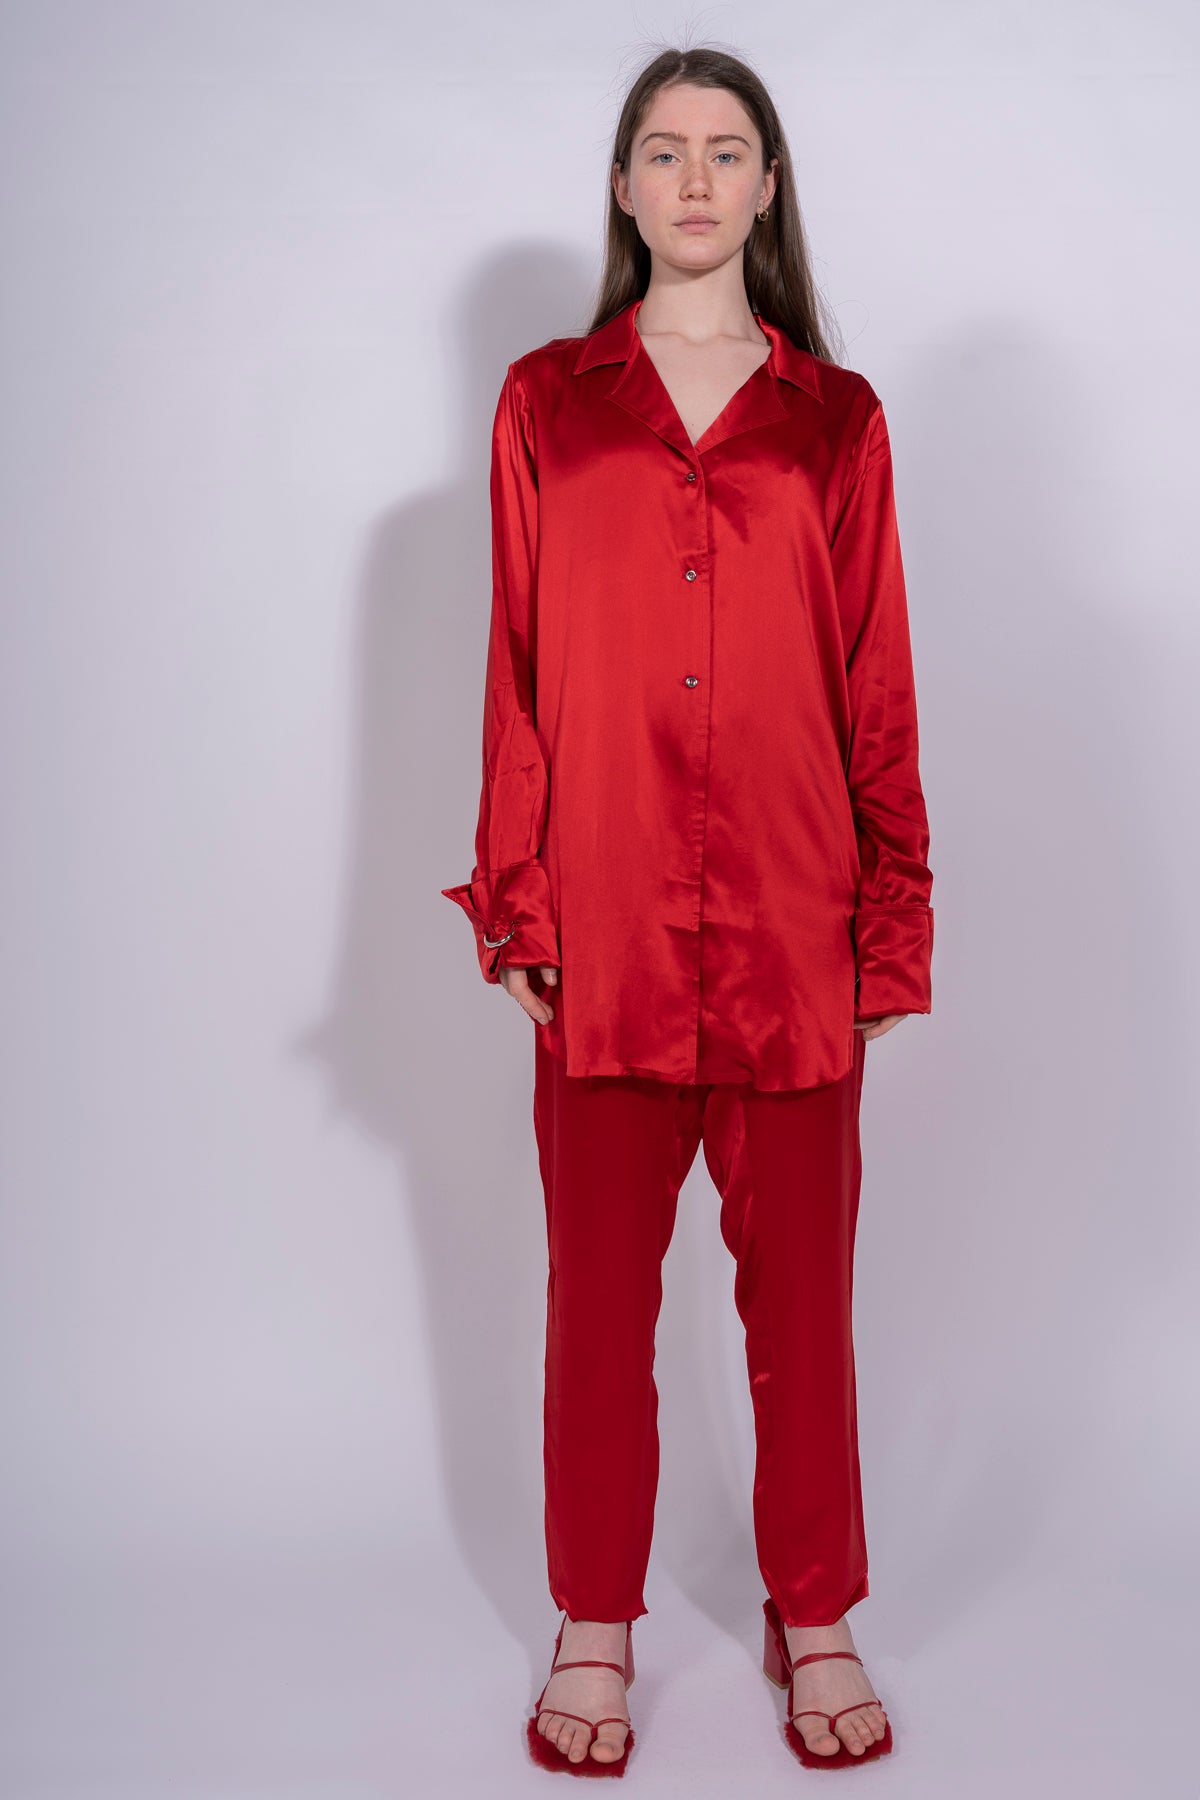 RED PYJAMA BLOUSE – MARQUES